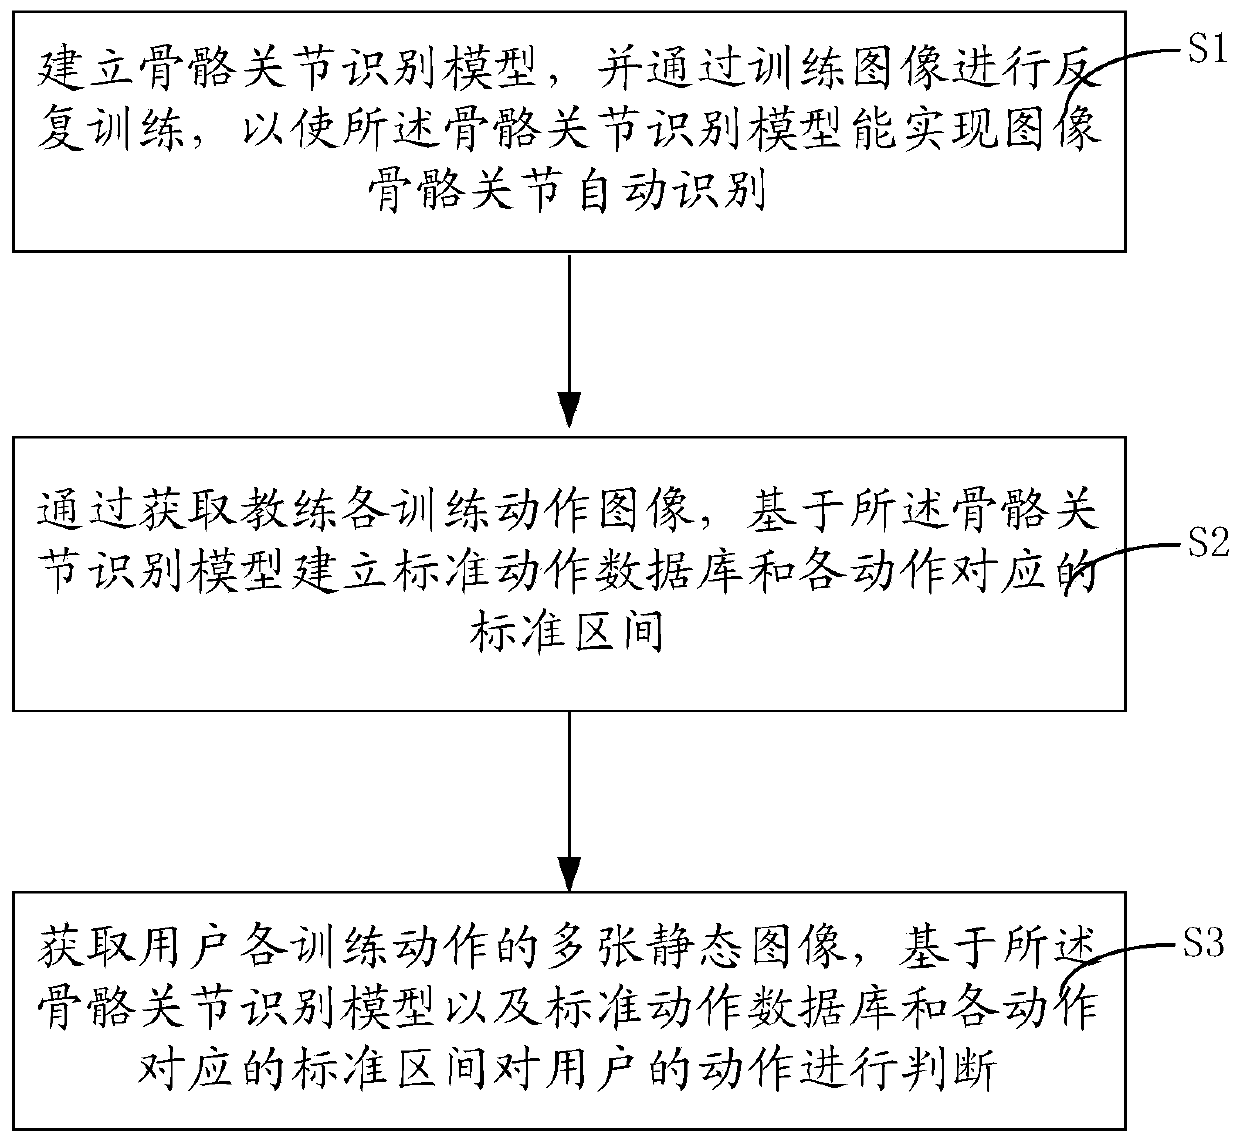 An action judgment method and system based on a joint connecting line